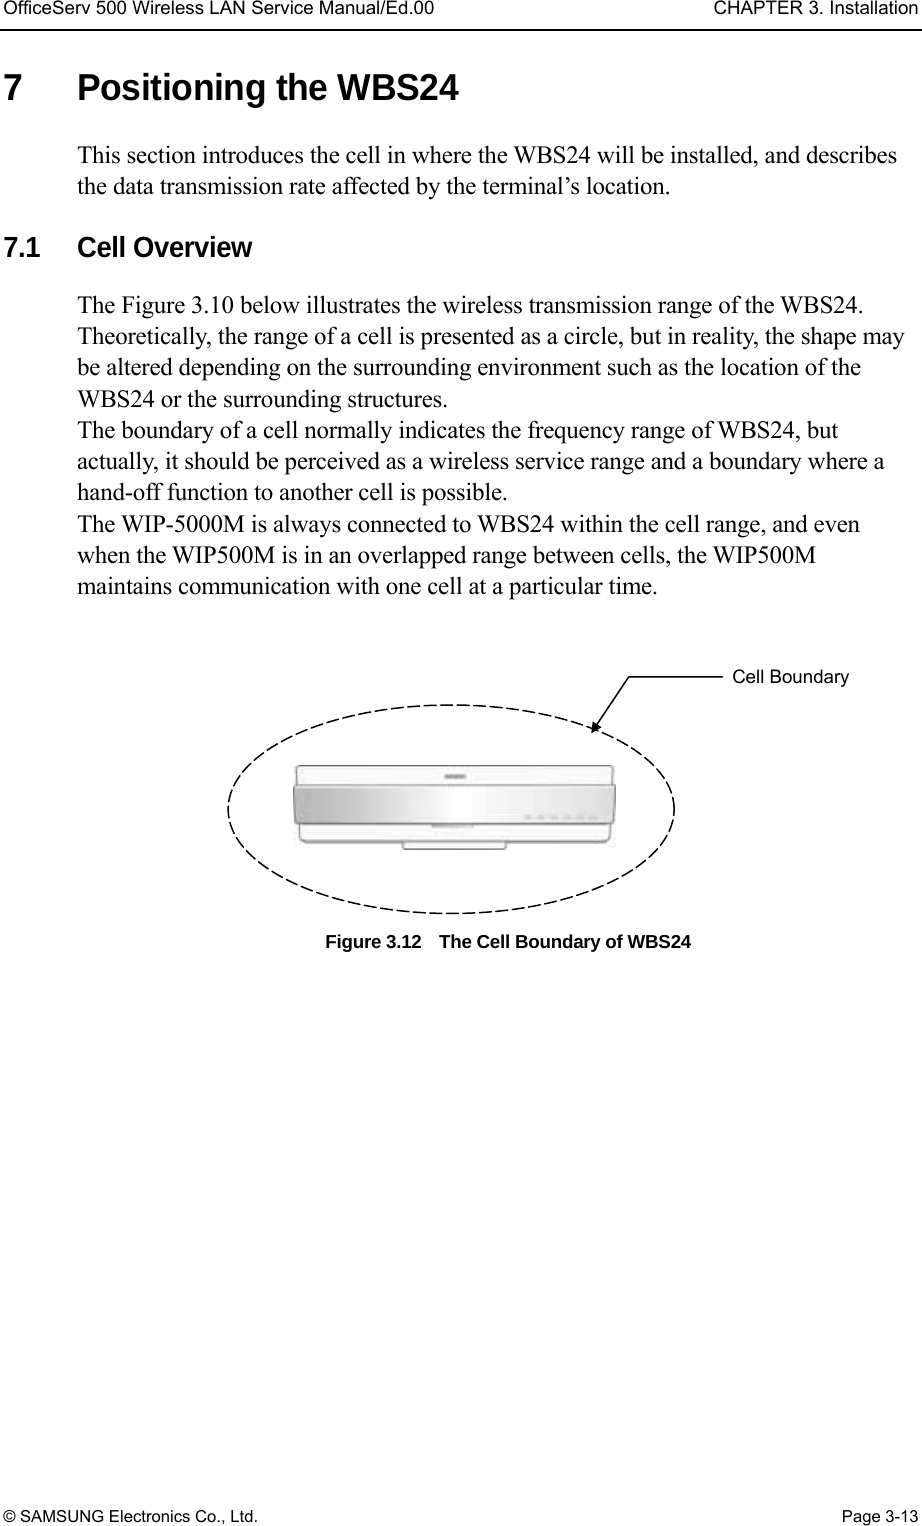 OfficeServ 500 Wireless LAN Service Manual/Ed.00  CHAPTER 3. Installation © SAMSUNG Electronics Co., Ltd.  Page 3-13 7  Positioning the WBS24 This section introduces the cell in where the WBS24 will be installed, and describes the data transmission rate affected by the terminal’s location.      7.1 Cell Overview The Figure 3.10 below illustrates the wireless transmission range of the WBS24. Theoretically, the range of a cell is presented as a circle, but in reality, the shape may be altered depending on the surrounding environment such as the location of the WBS24 or the surrounding structures. The boundary of a cell normally indicates the frequency range of WBS24, but actually, it should be perceived as a wireless service range and a boundary where a hand-off function to another cell is possible.   The WIP-5000M is always connected to WBS24 within the cell range, and even when the WIP500M is in an overlapped range between cells, the WIP500M maintains communication with one cell at a particular time.  Figure 3.12    The Cell Boundary of WBS24    Cell Boundary 